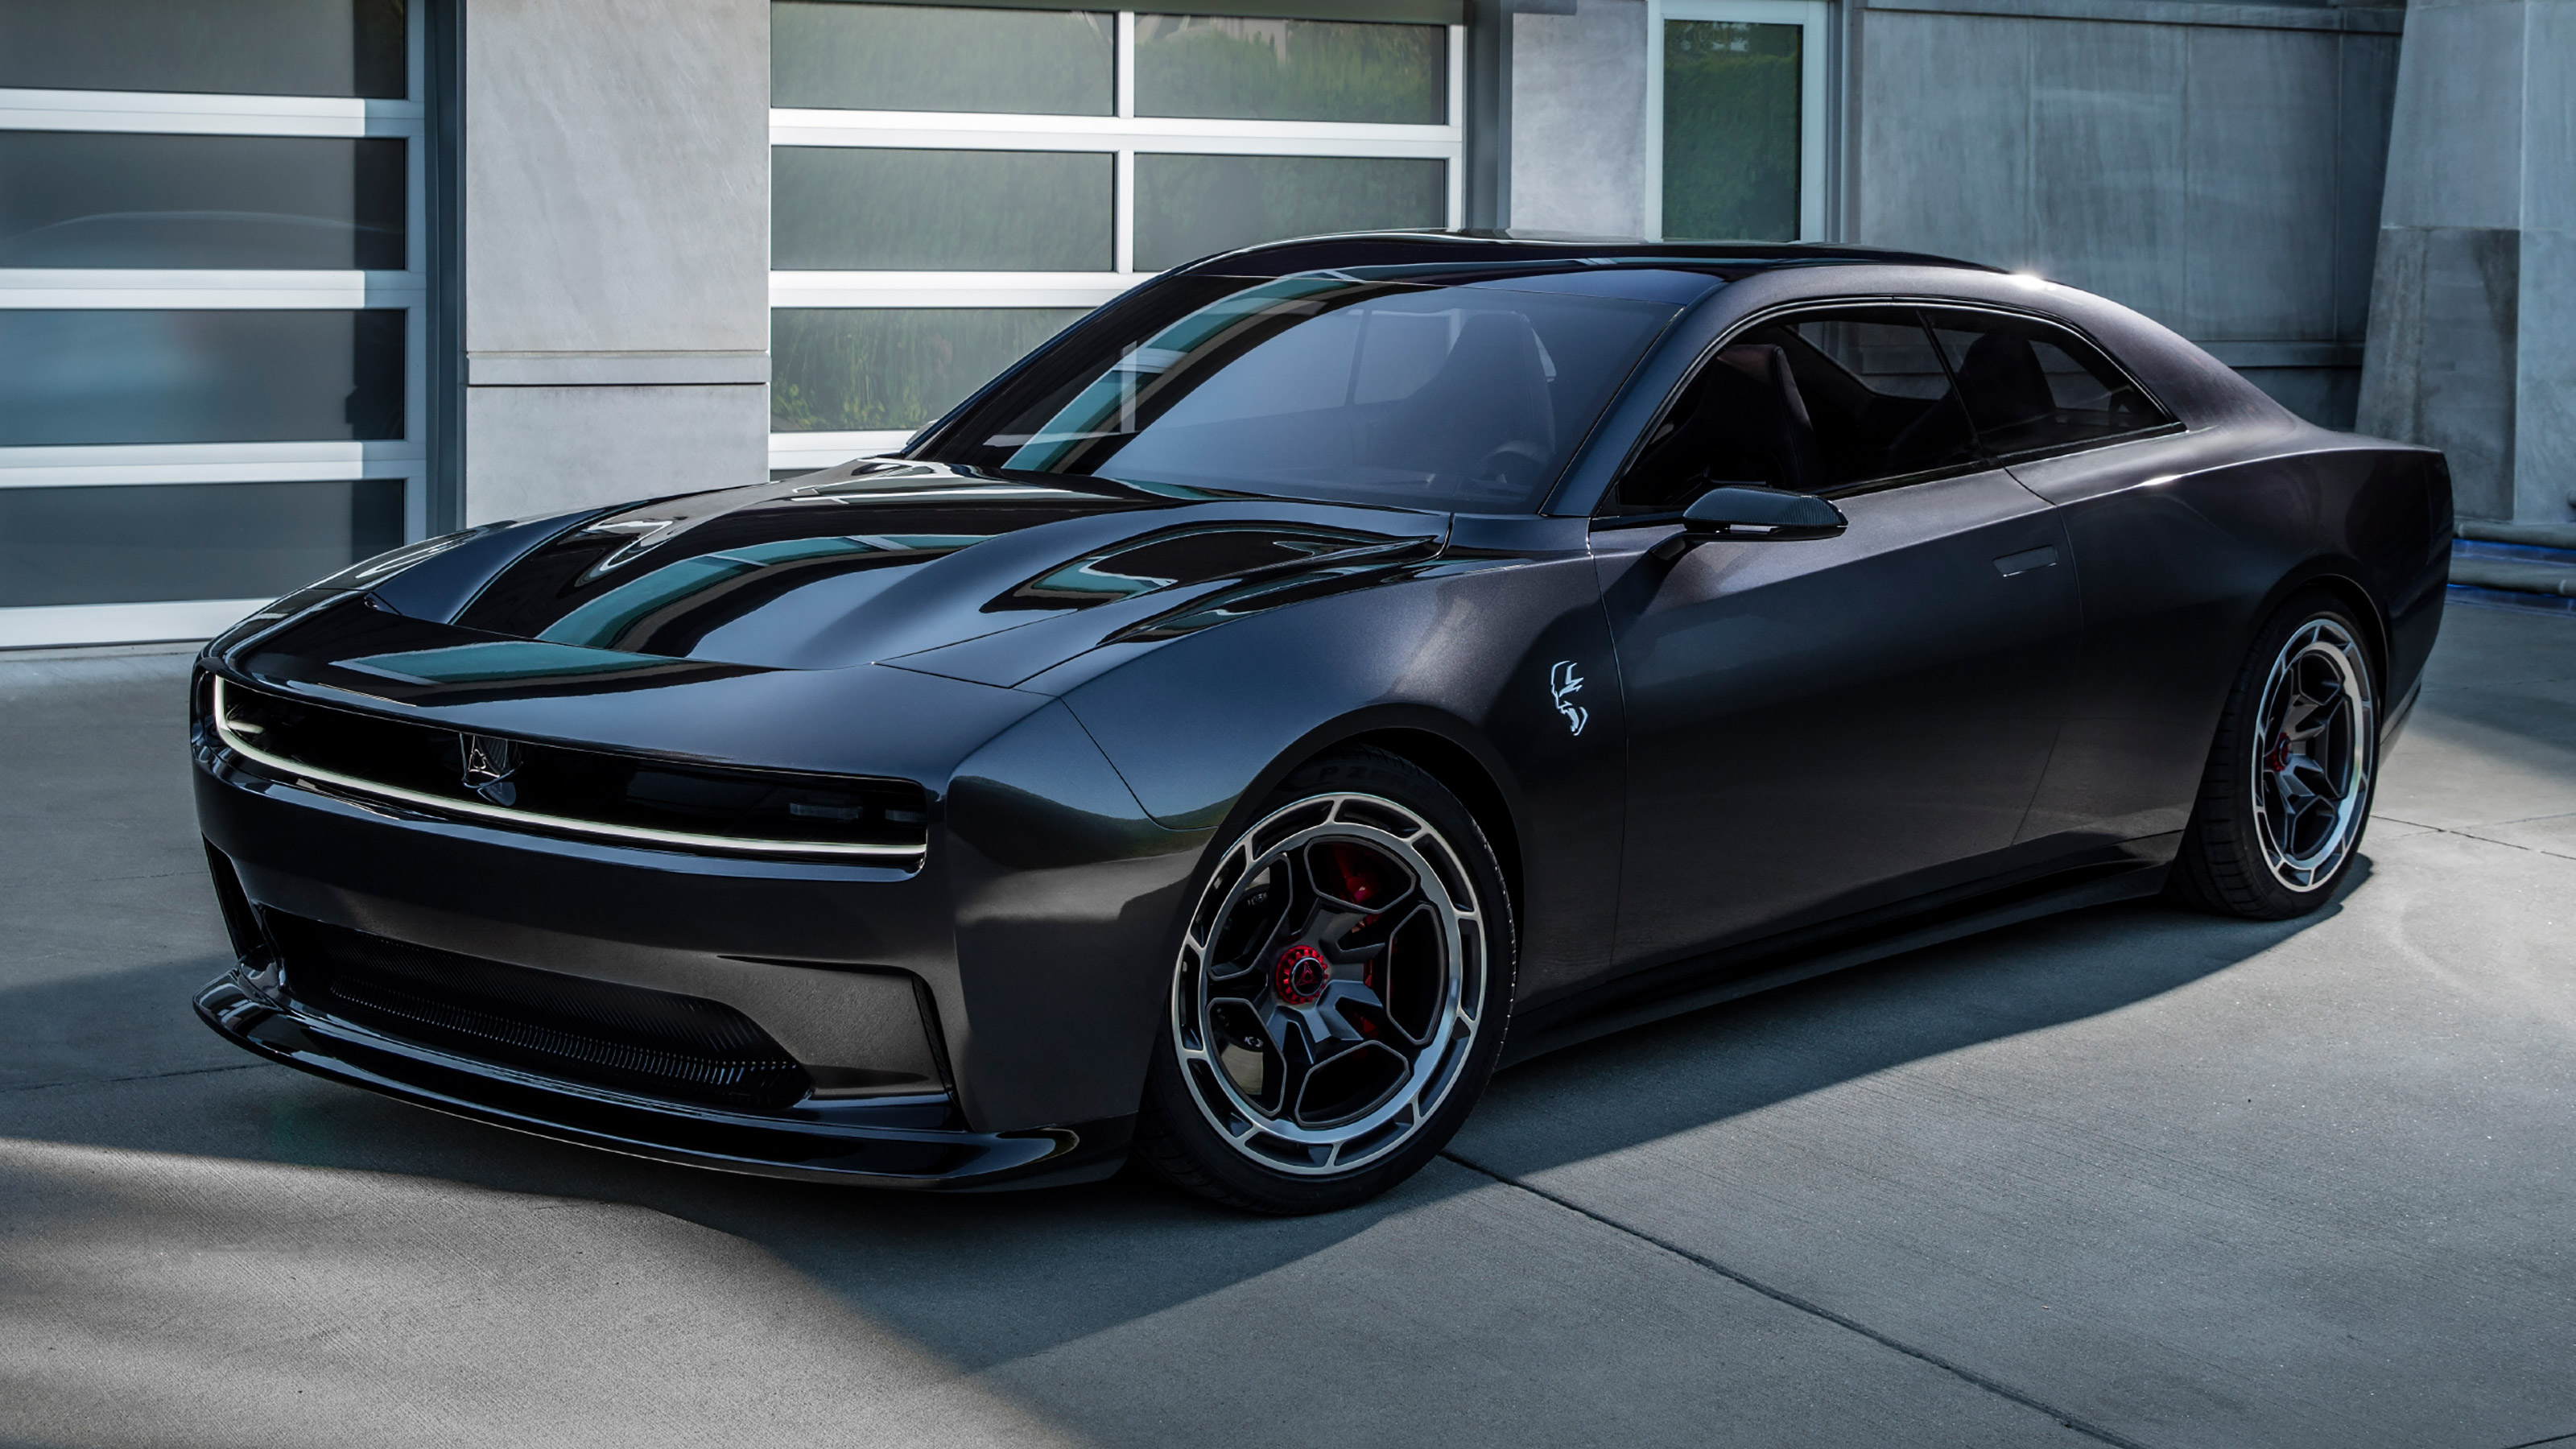 Dodge Charger Daytona SRT Concept EV debuts – the first electric muscle car  | evo